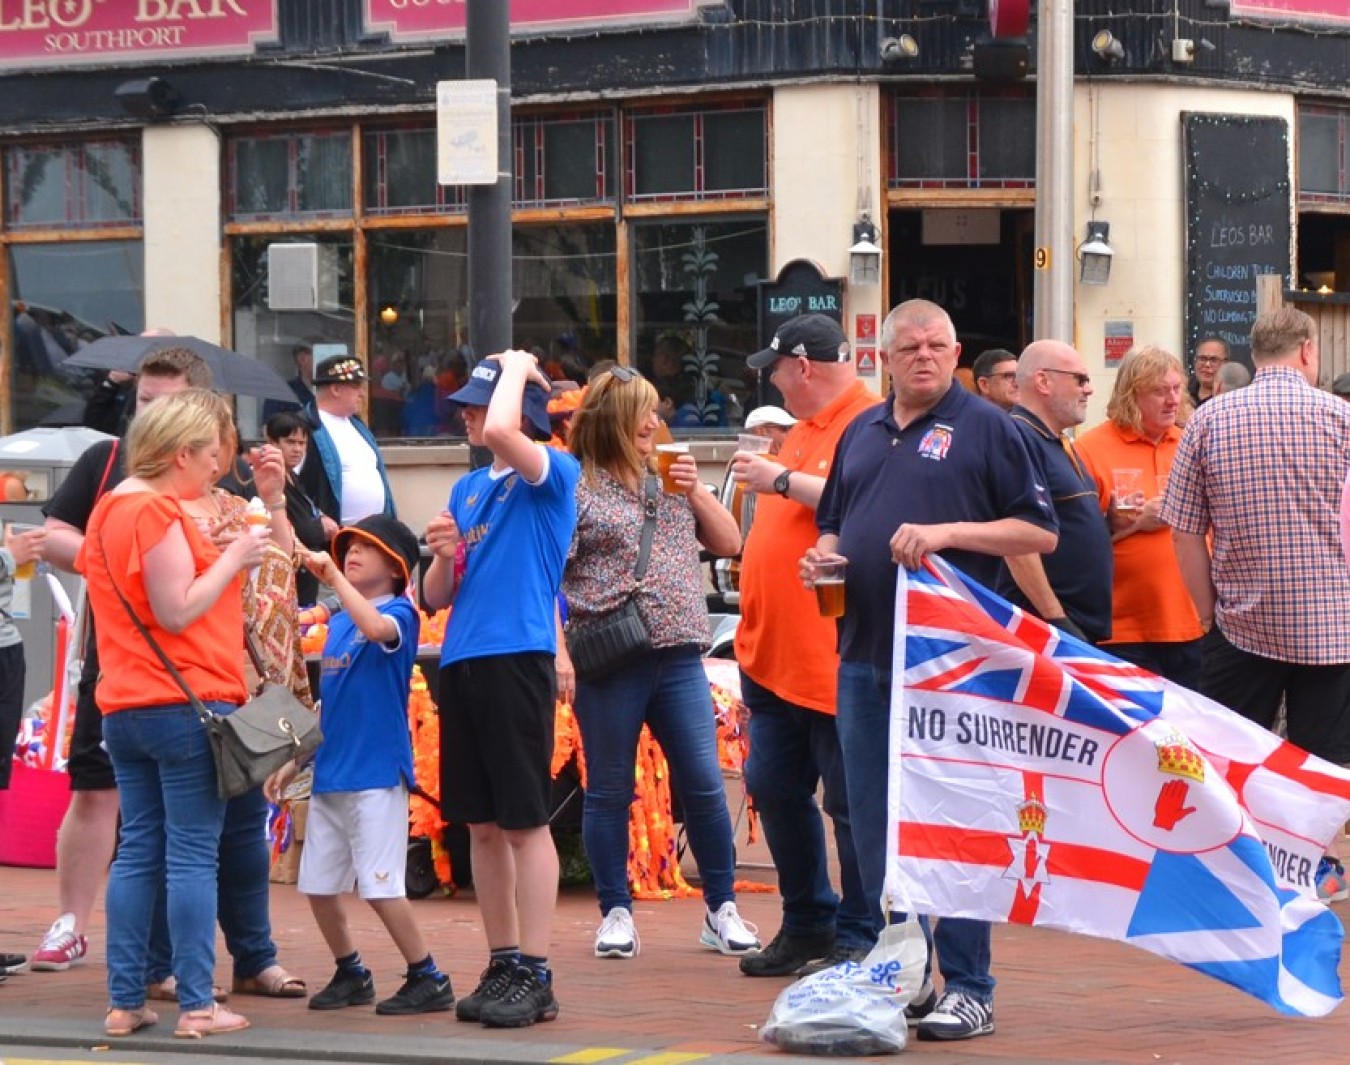 Orange Lodges Parade through Southport this morning. Video of the